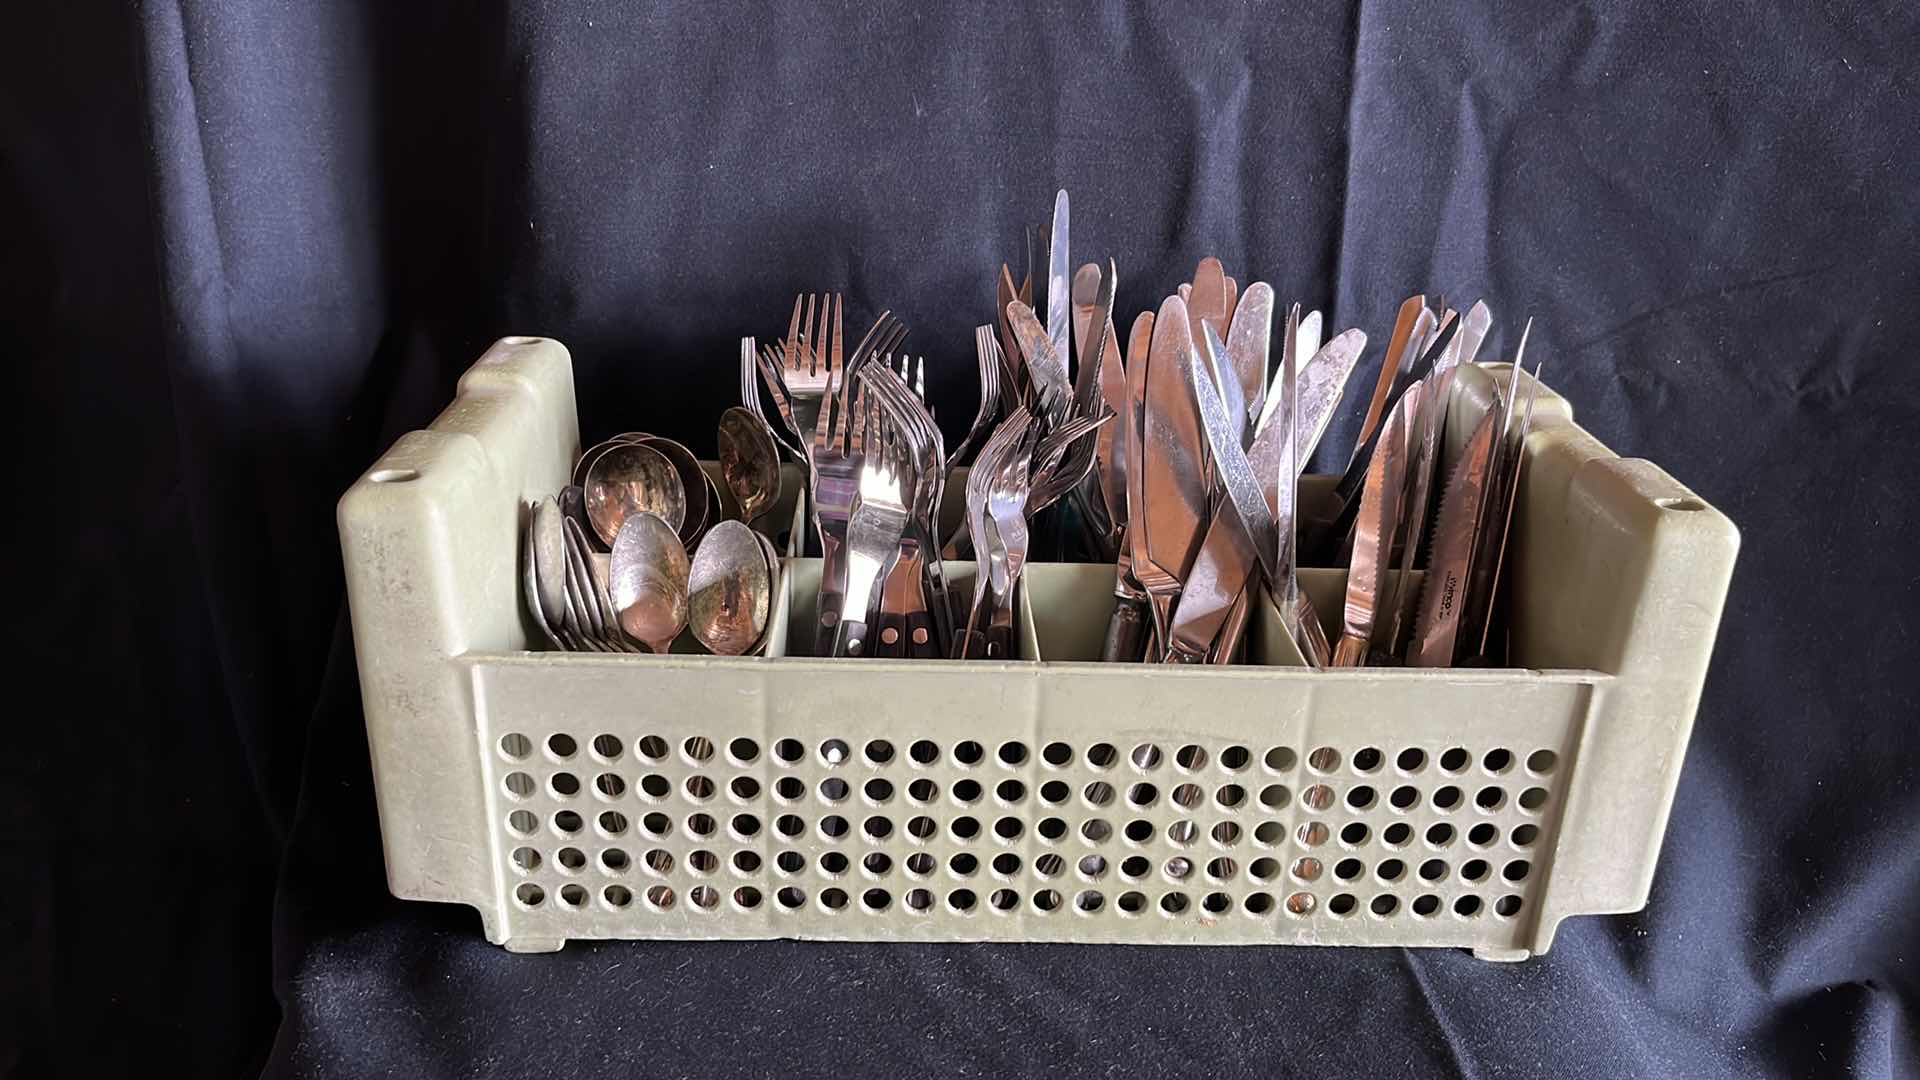 Photo 1 of FLATWARE VARIOUS STYLES SPOONS, FORKS, BUTTER KNIVES, STEAK KNIVES SETS OF 20 EACH W COMMERCIAL HALF SIZE FLATWARE RACK